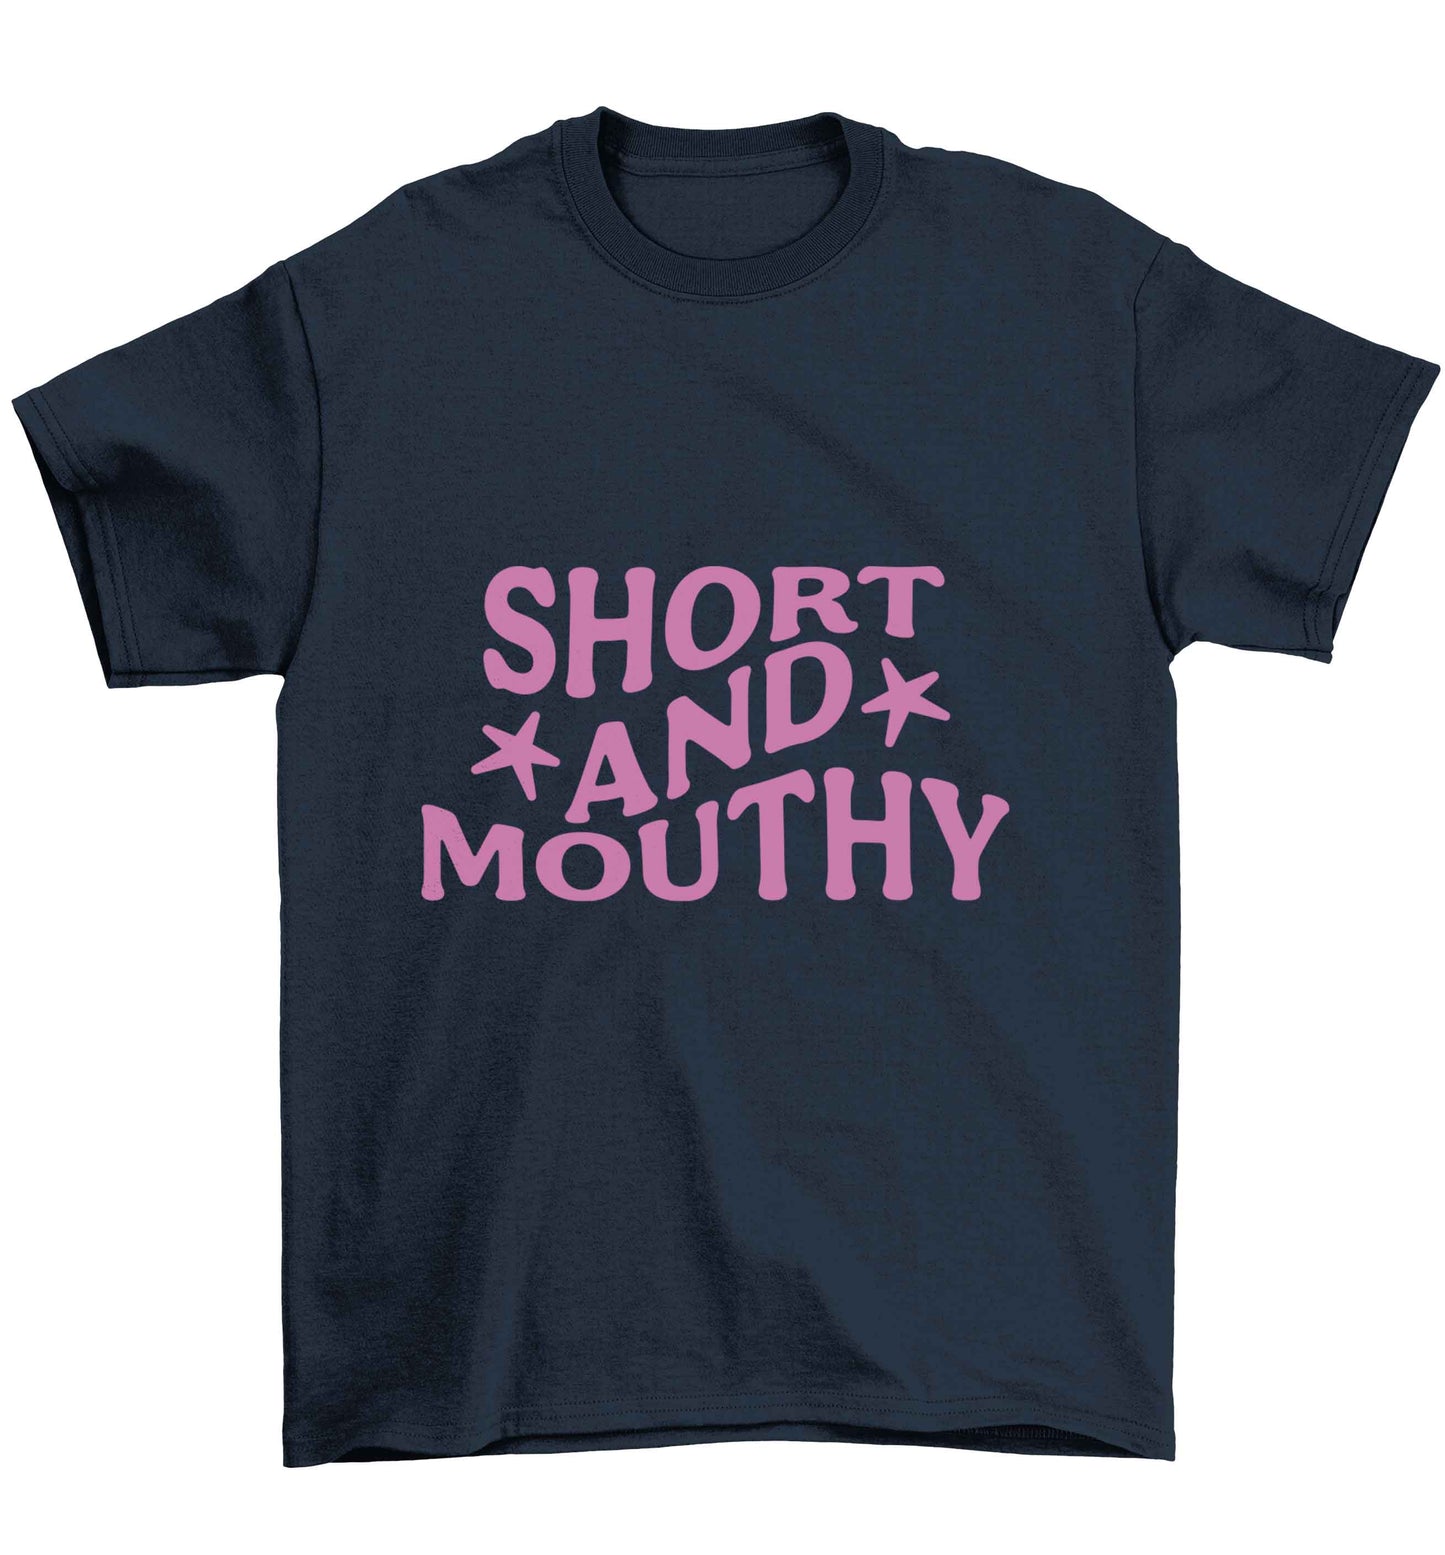 Short and mouthy Children's navy Tshirt 12-13 Years